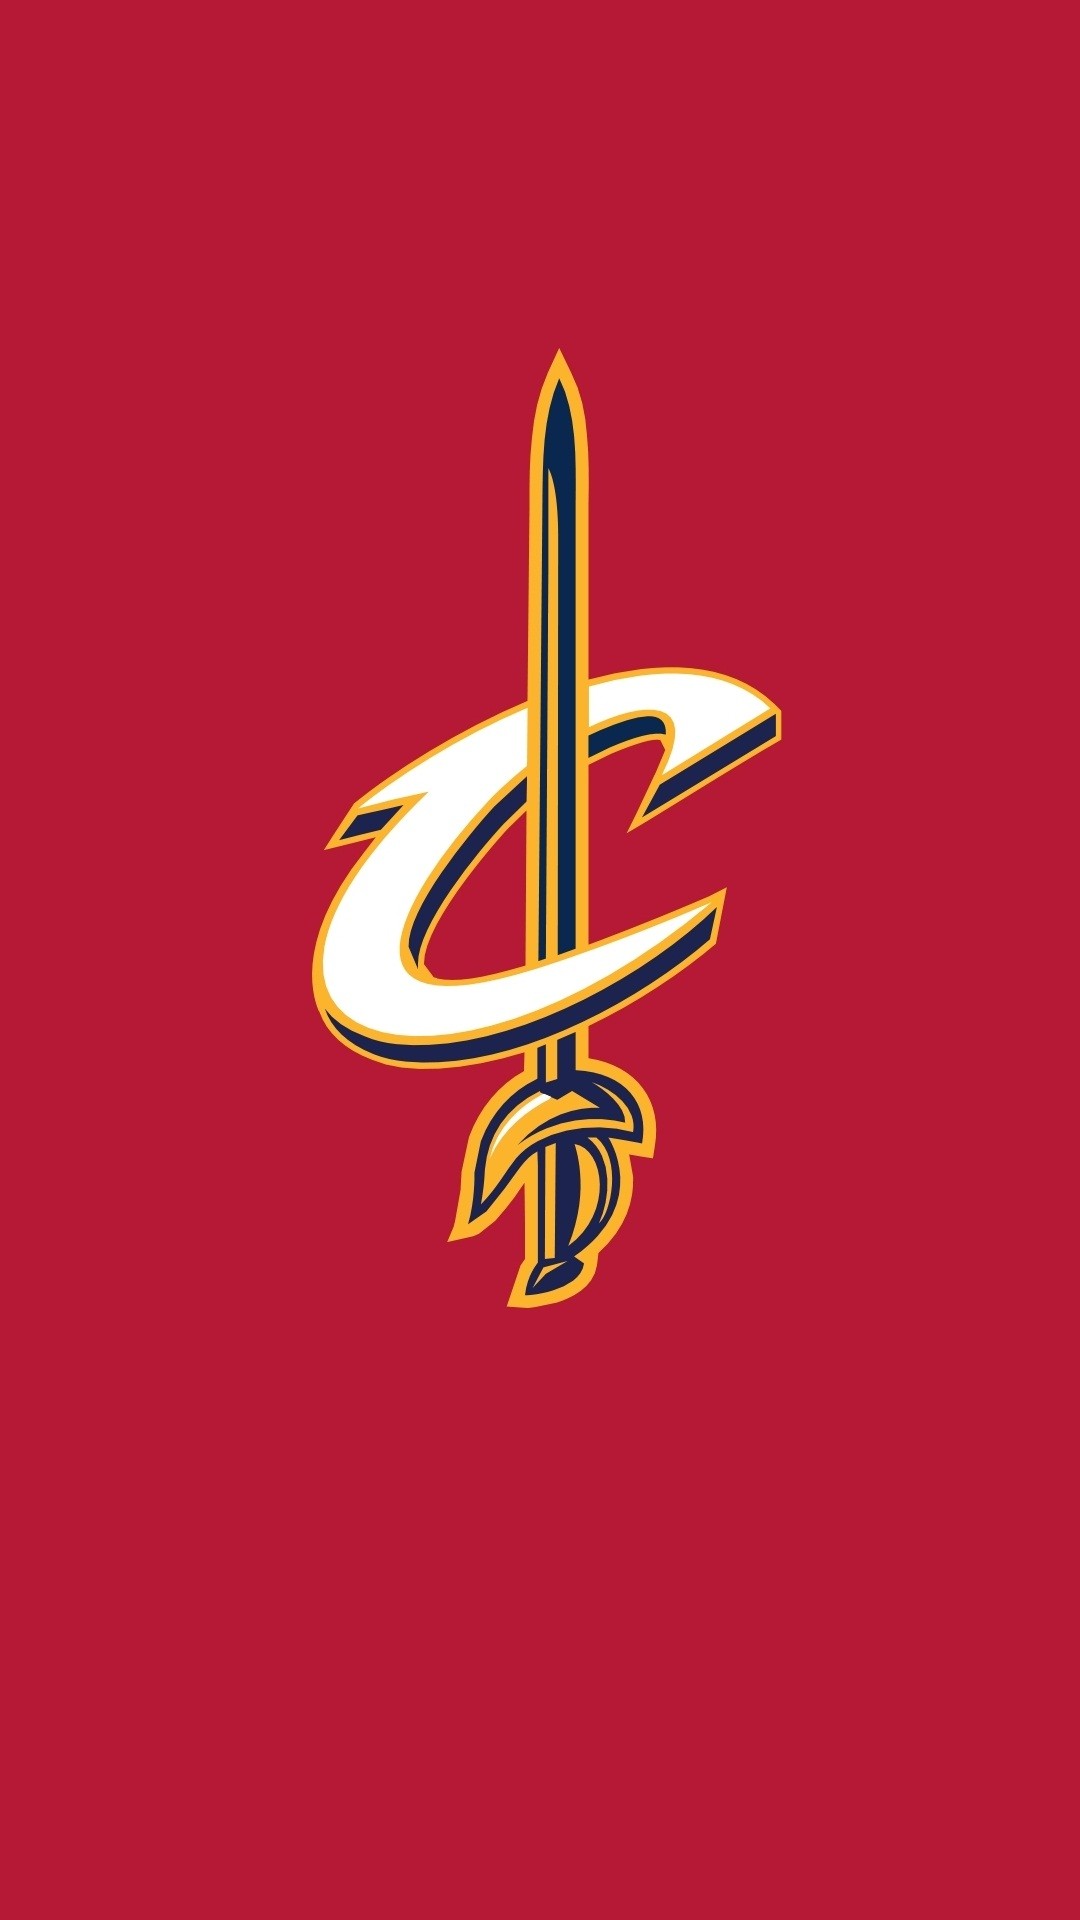 Cleveland Cavaliers Wallpaper For Iphone resolution 1080x1920